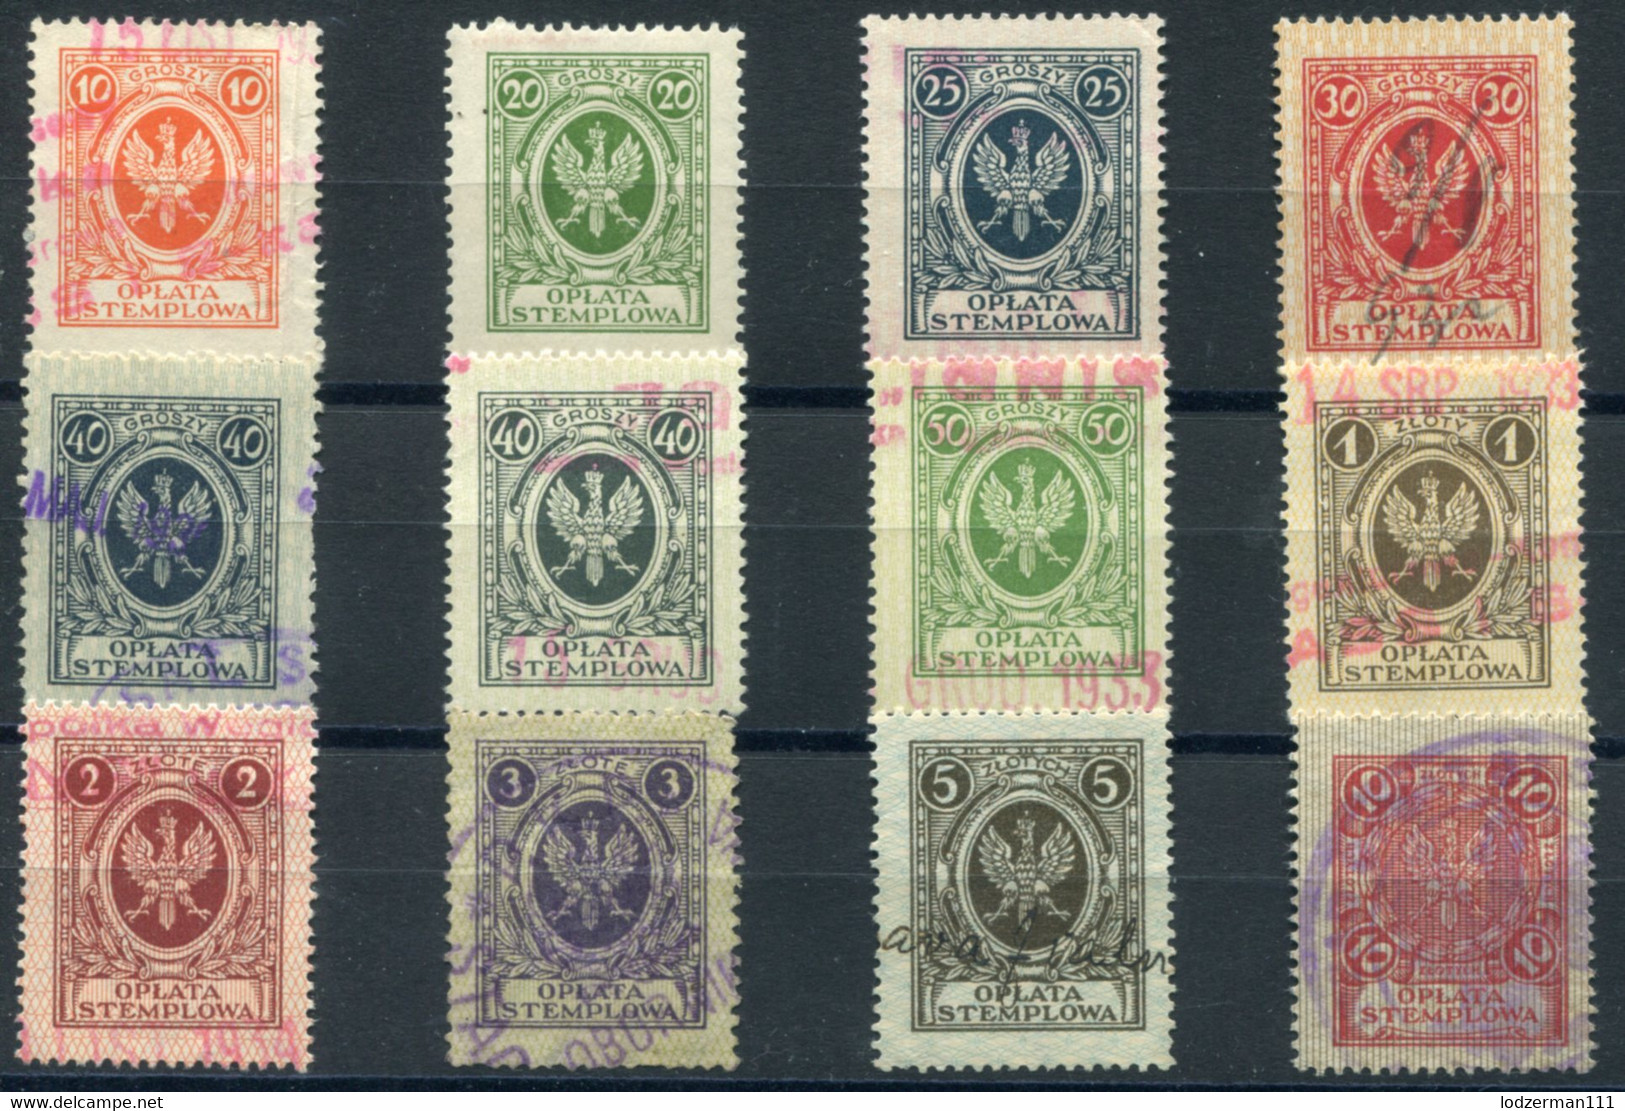 1927 General Zloty Issue #85-96 Compl. Set Used (1 MNH) All VF - Revenue Stamps